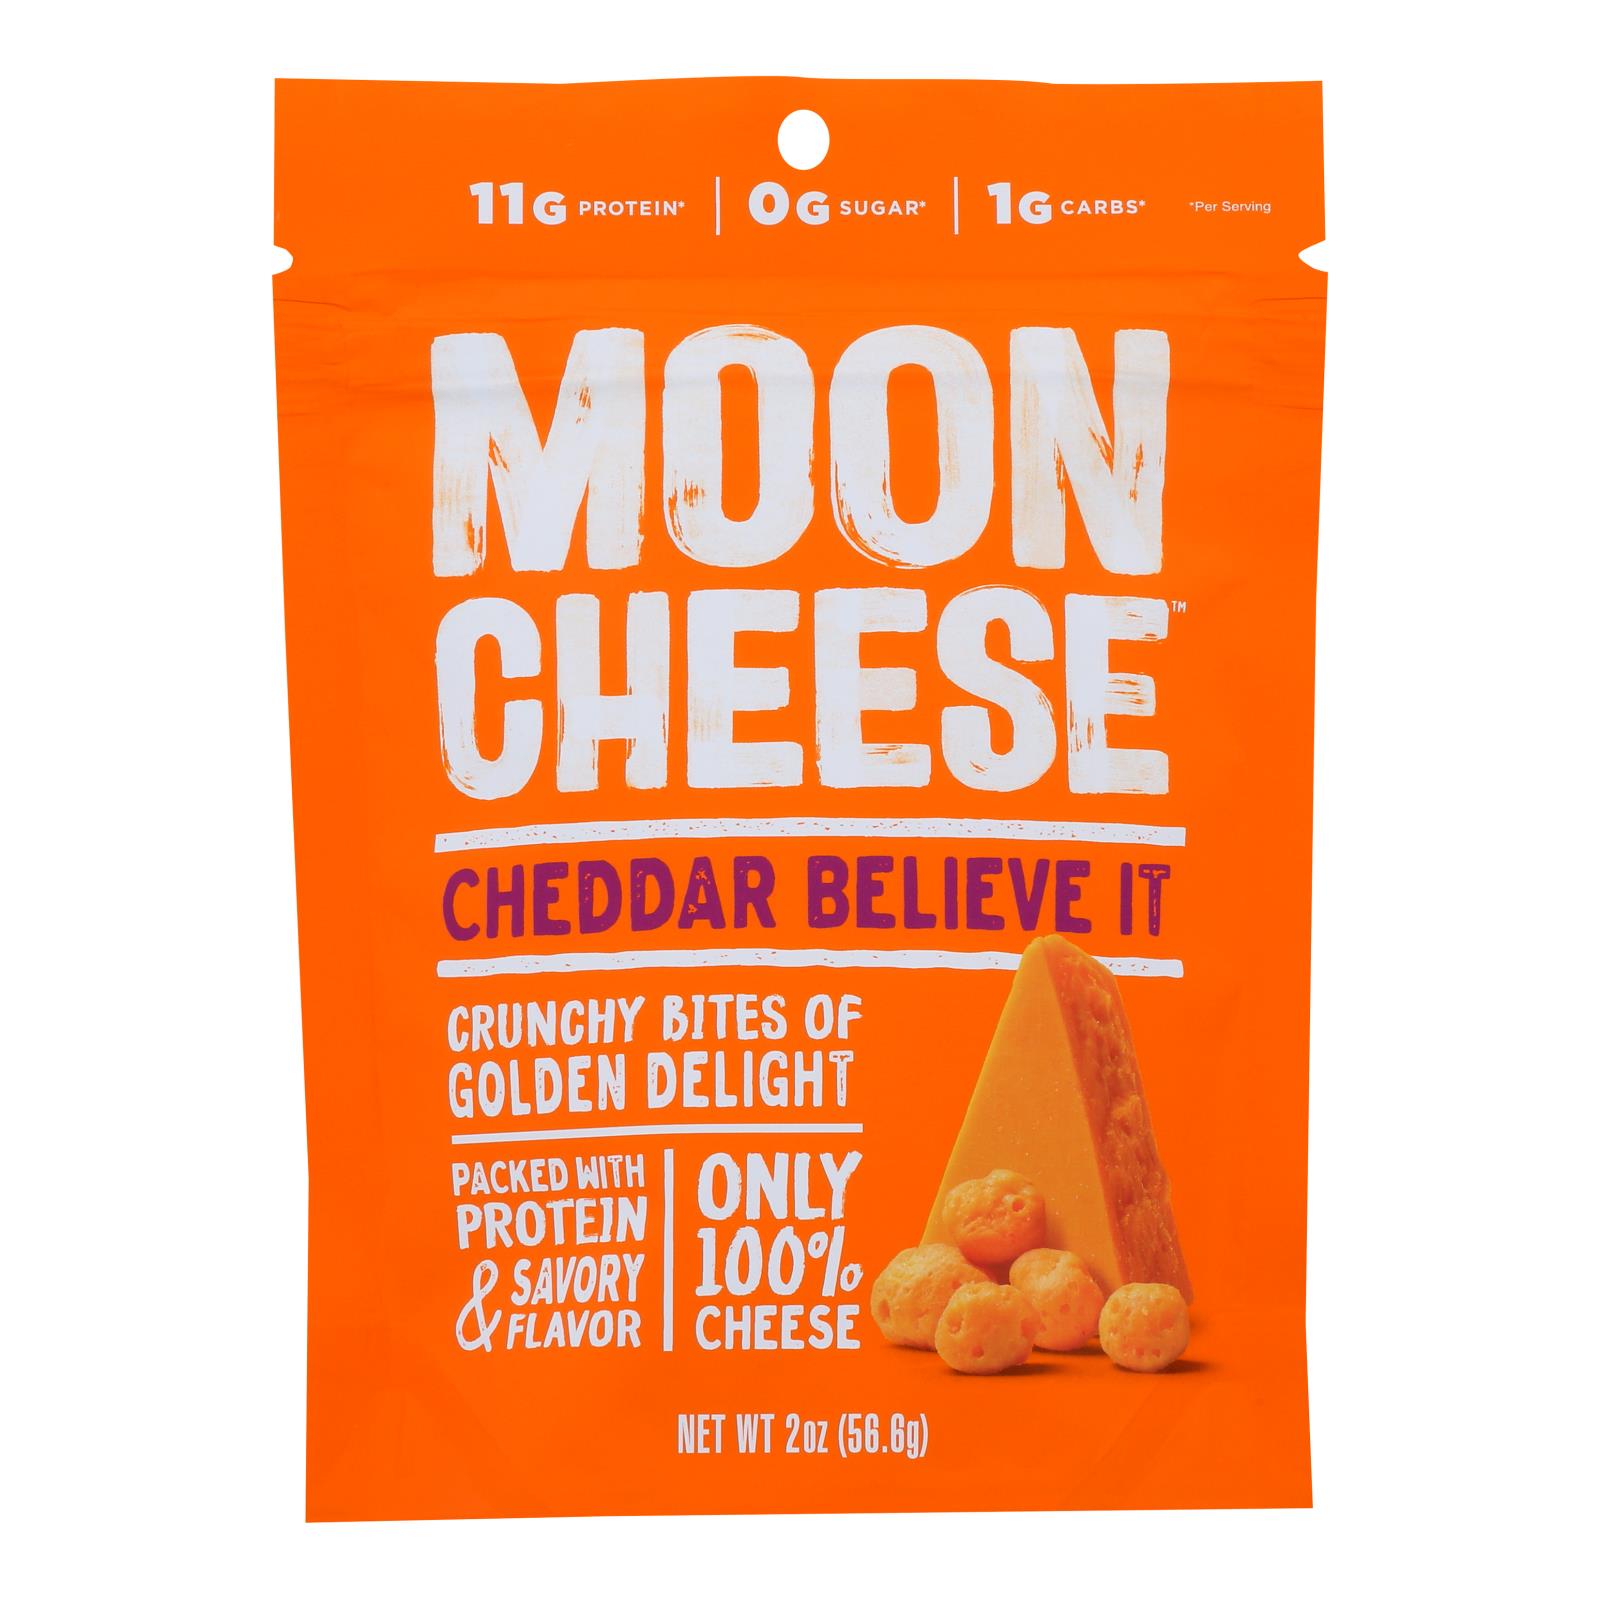 Moon Cheese's Cheddar Dehydrated Cheese Snack - 12개 묶음상품 - 2 OZ